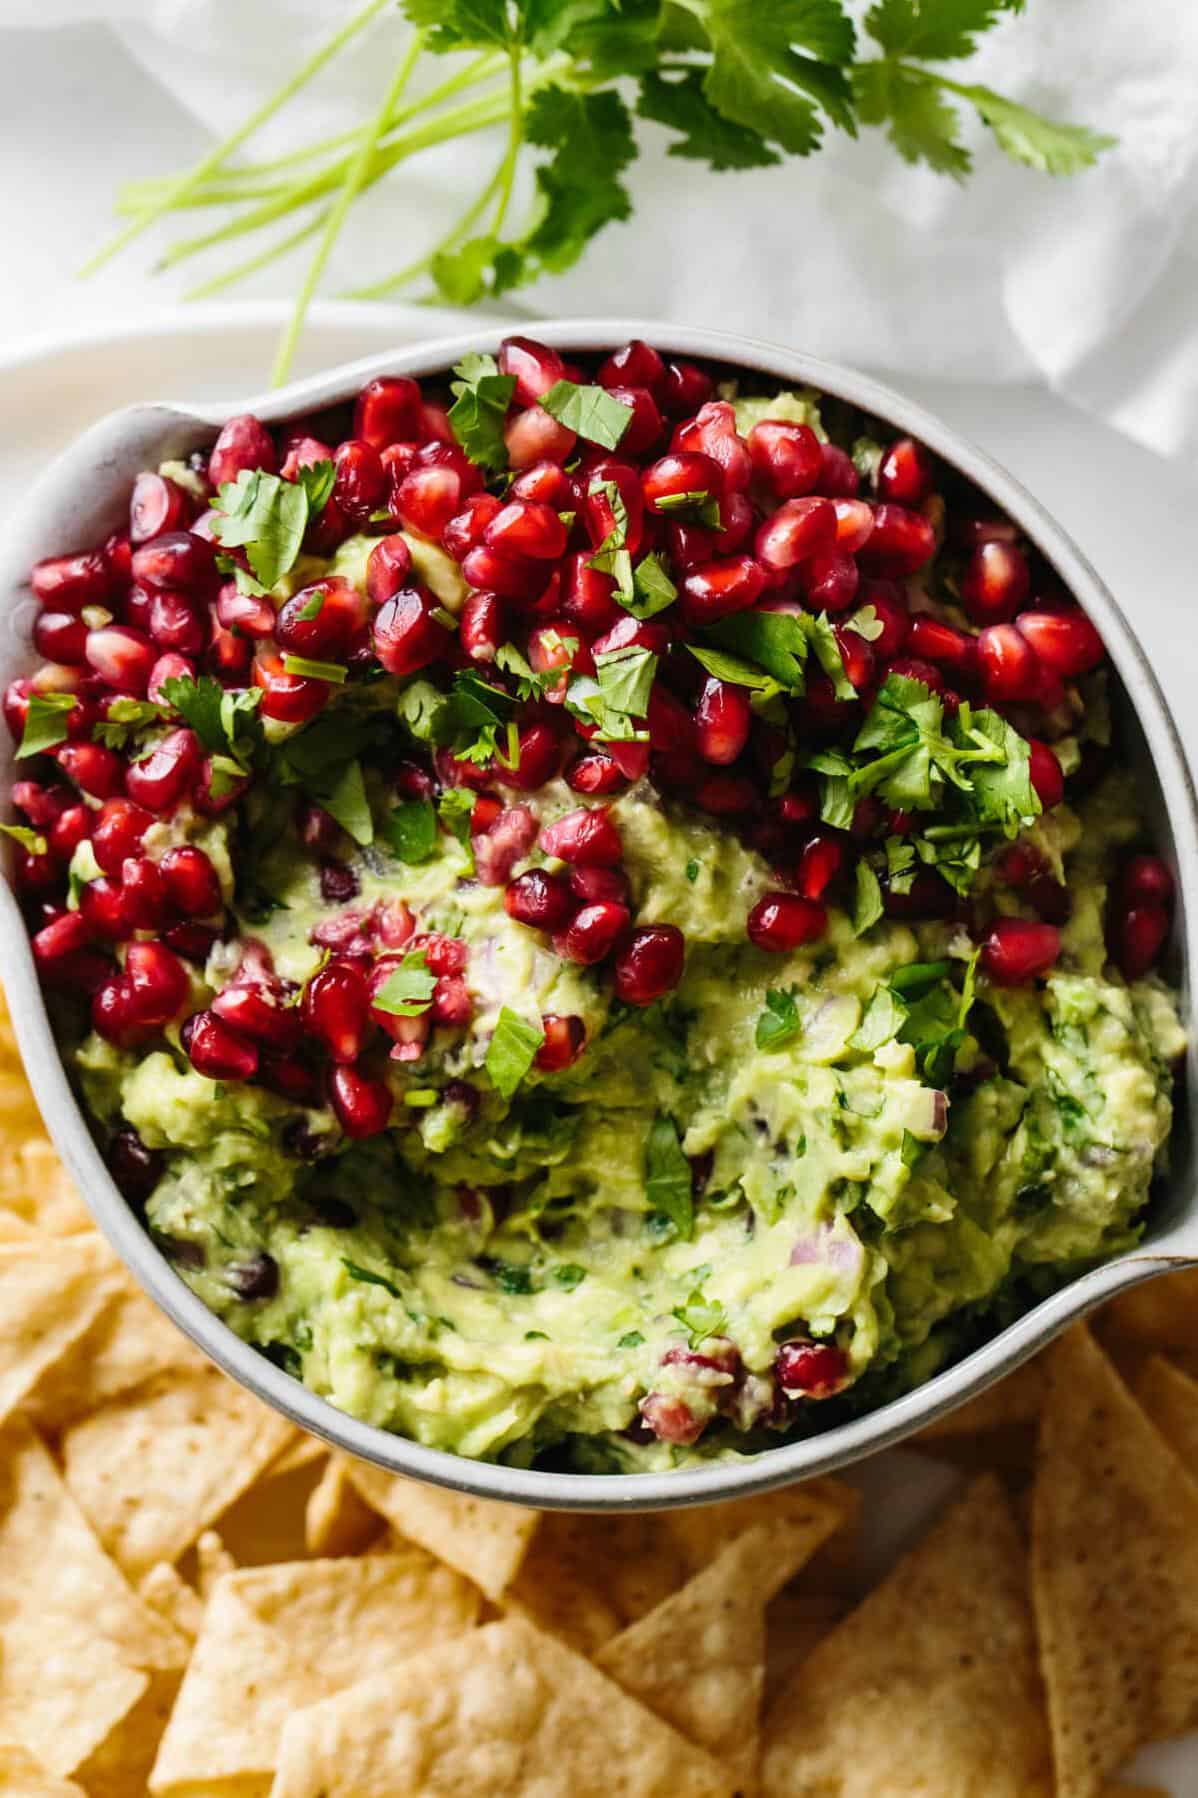  Dip into this colorful and flavorful Pomegranate and Avocado Dip!